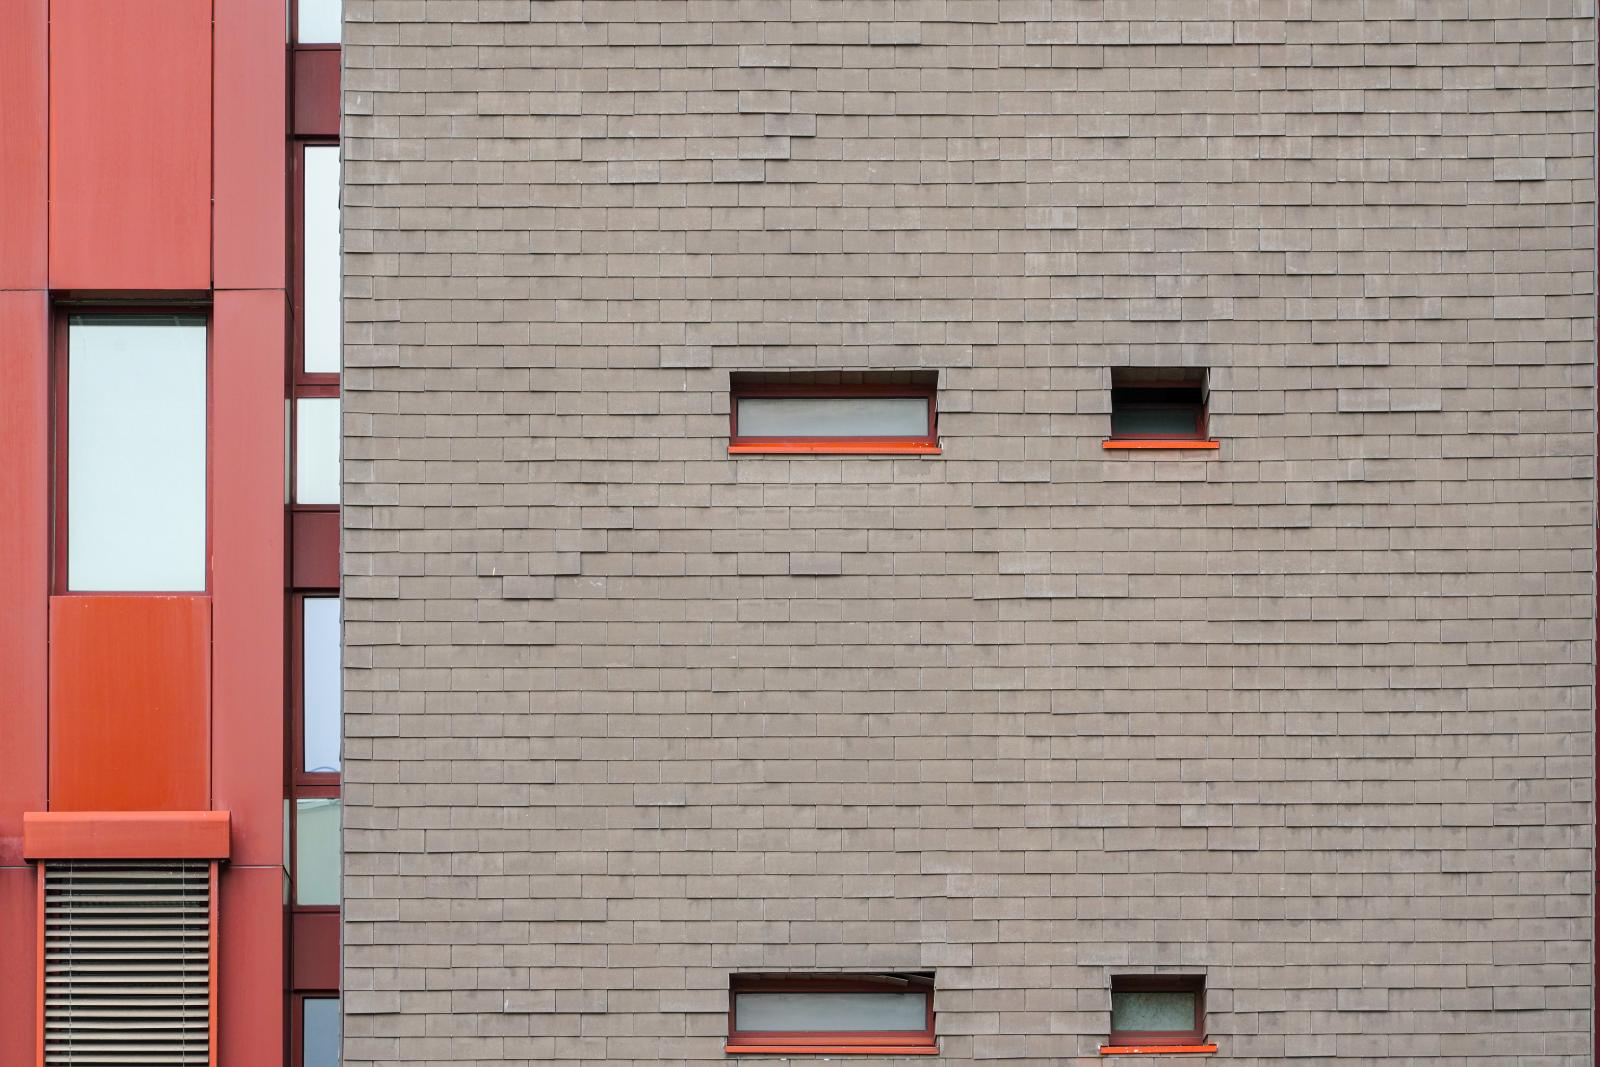 Architectural Diversity: Contrasting Aesthetics | Buy this image